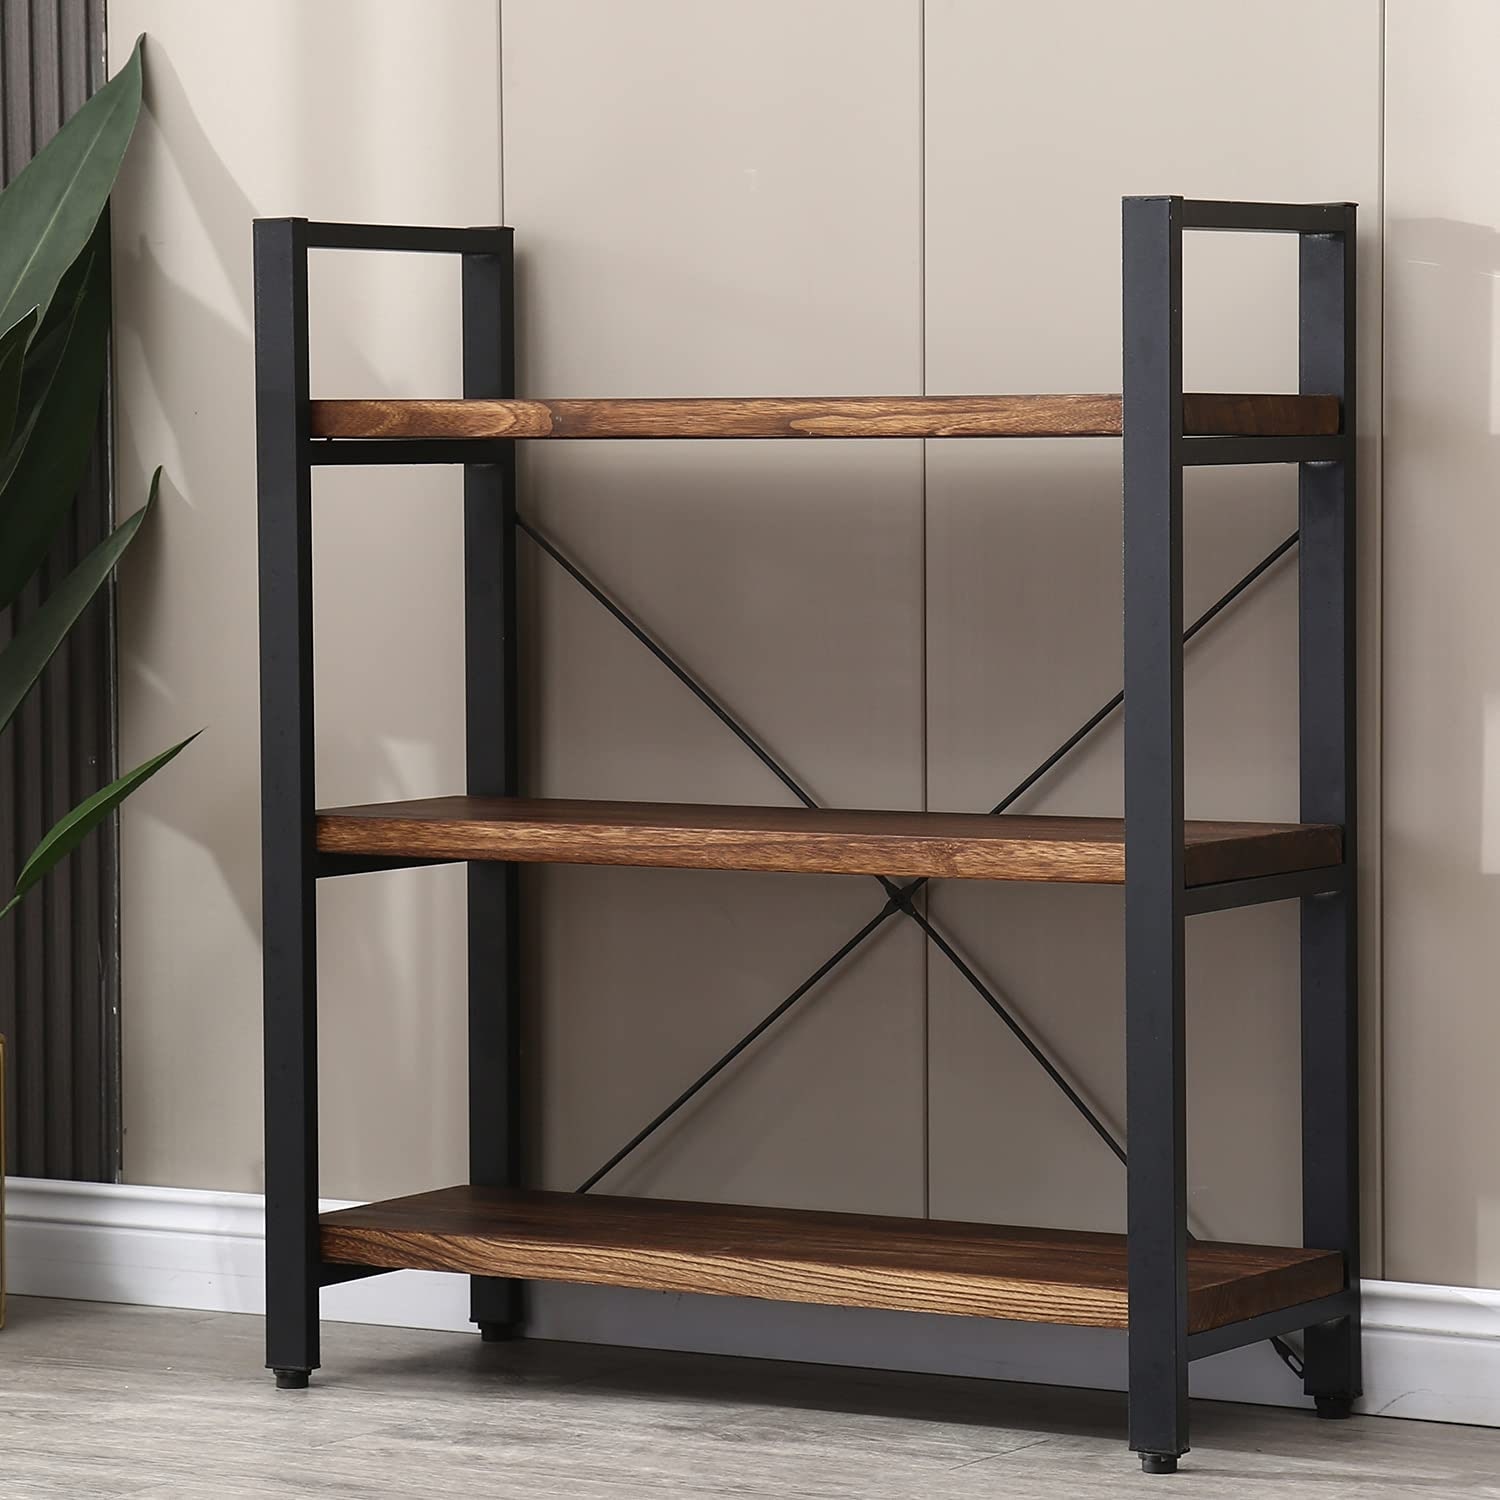 3 Tier Bookcase, Solid Wood Bookshelf Rustic Vintage Industrial Etagere Bookcase, Metal and Wood